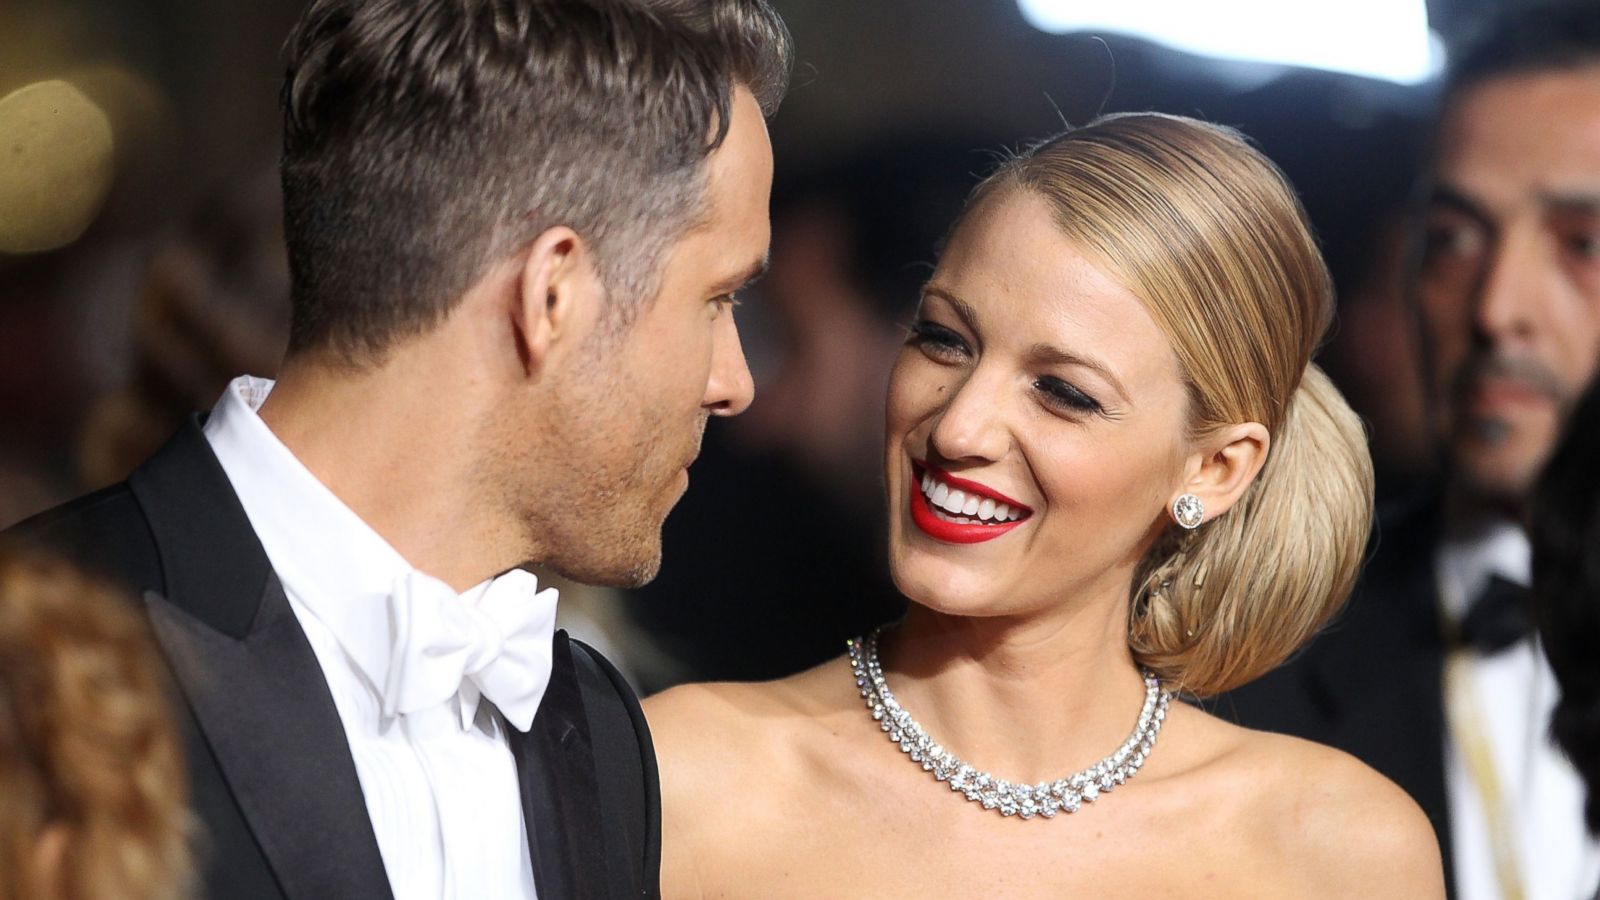 Blake Lively Opens Up About Husband Ryan Reynolds - ABC News